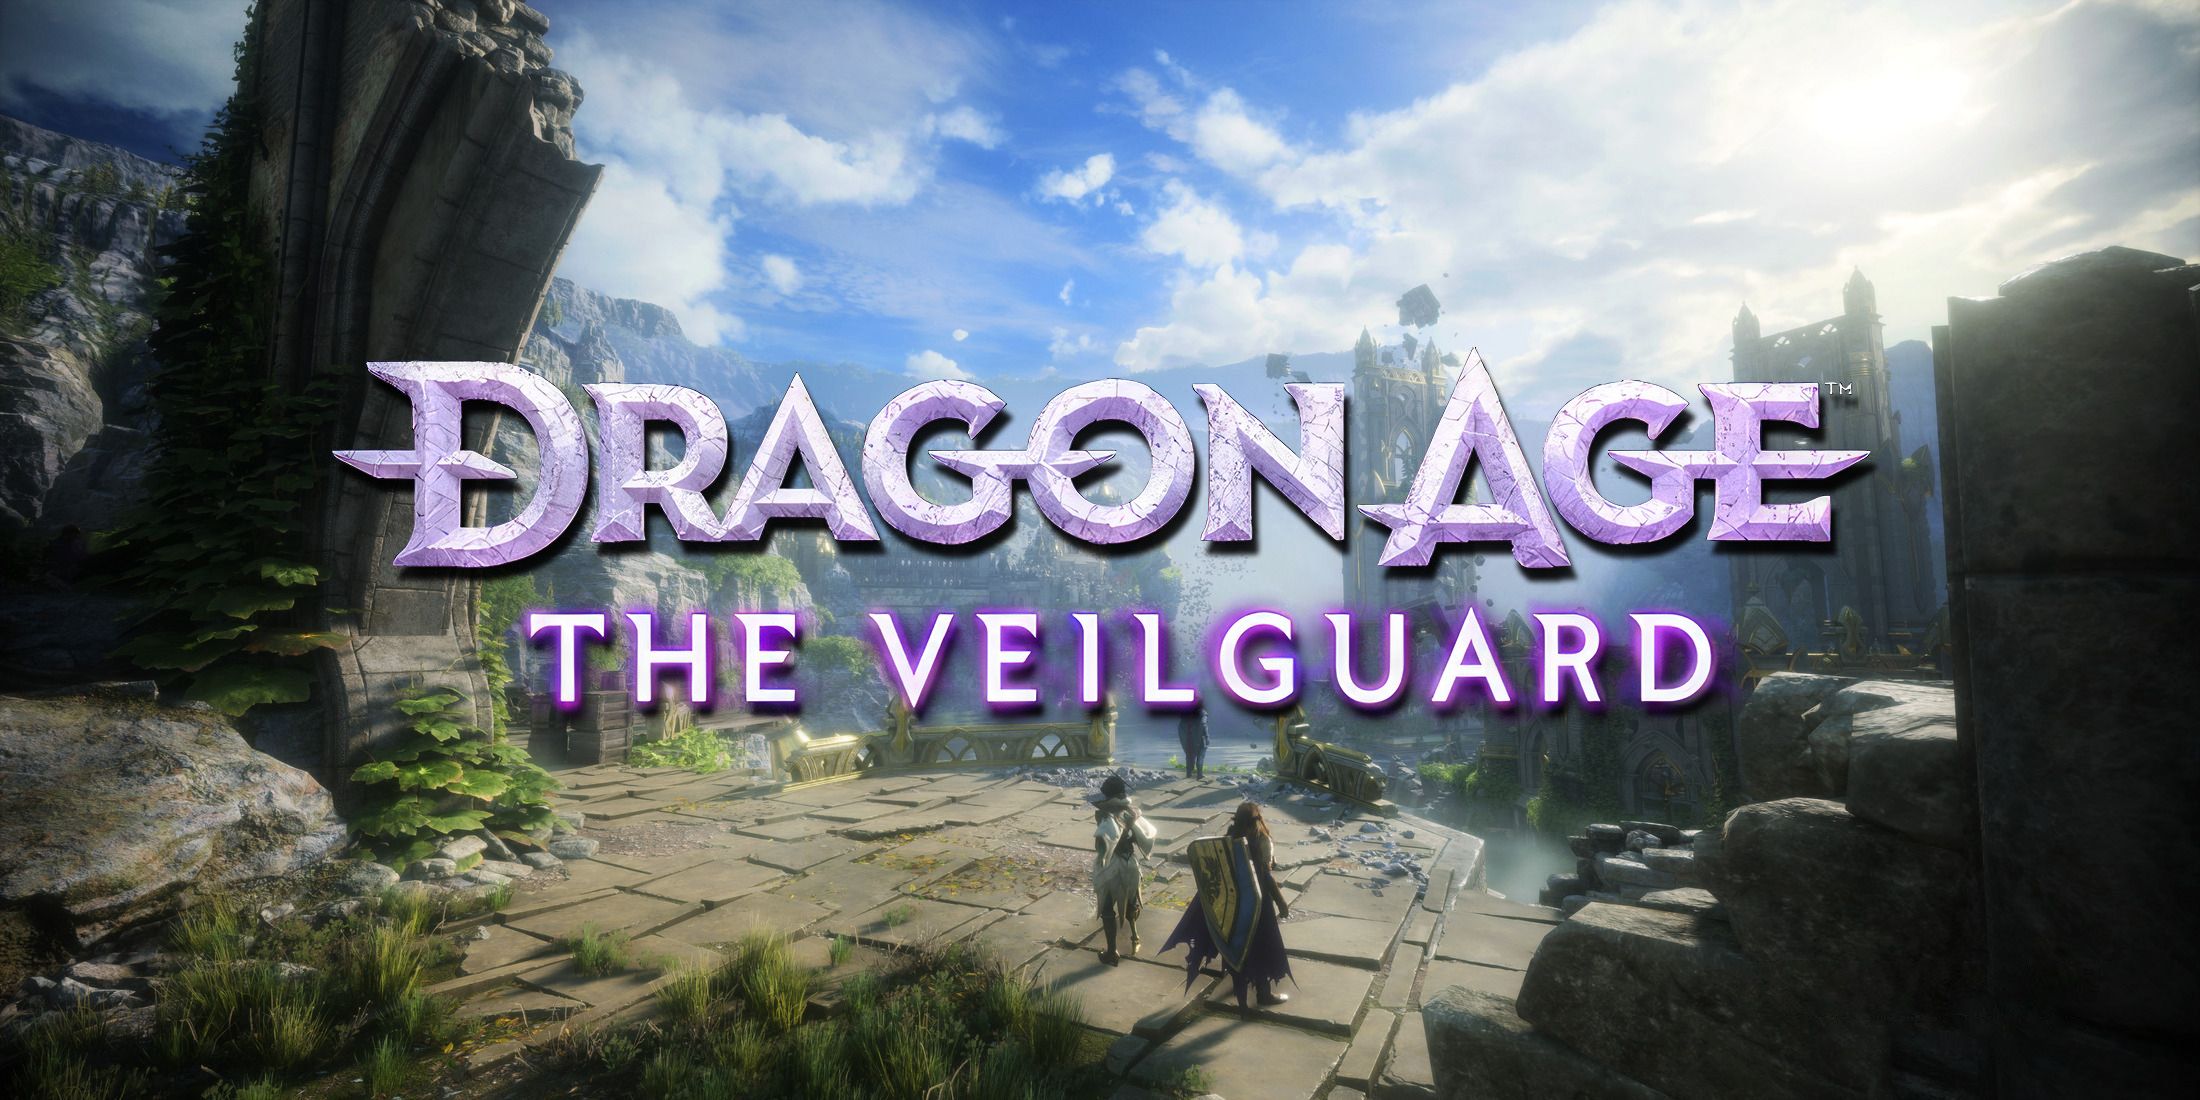 Dragon Age The Veilguard daytime world green and blue scenery with game logo